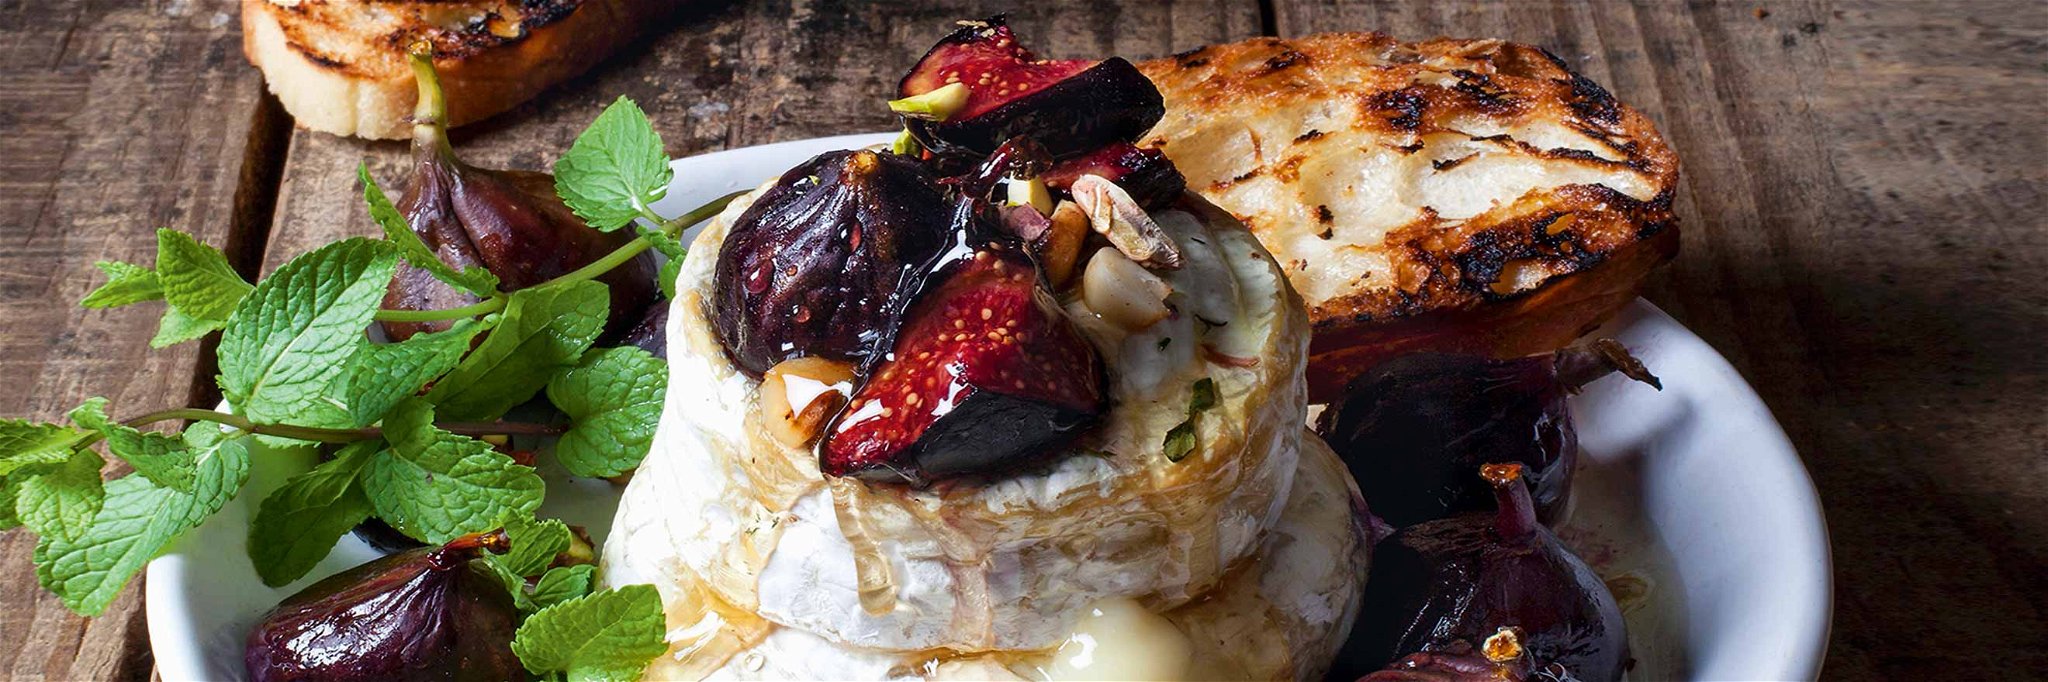 Baked Camembert with figs, macadamia brittle and honey